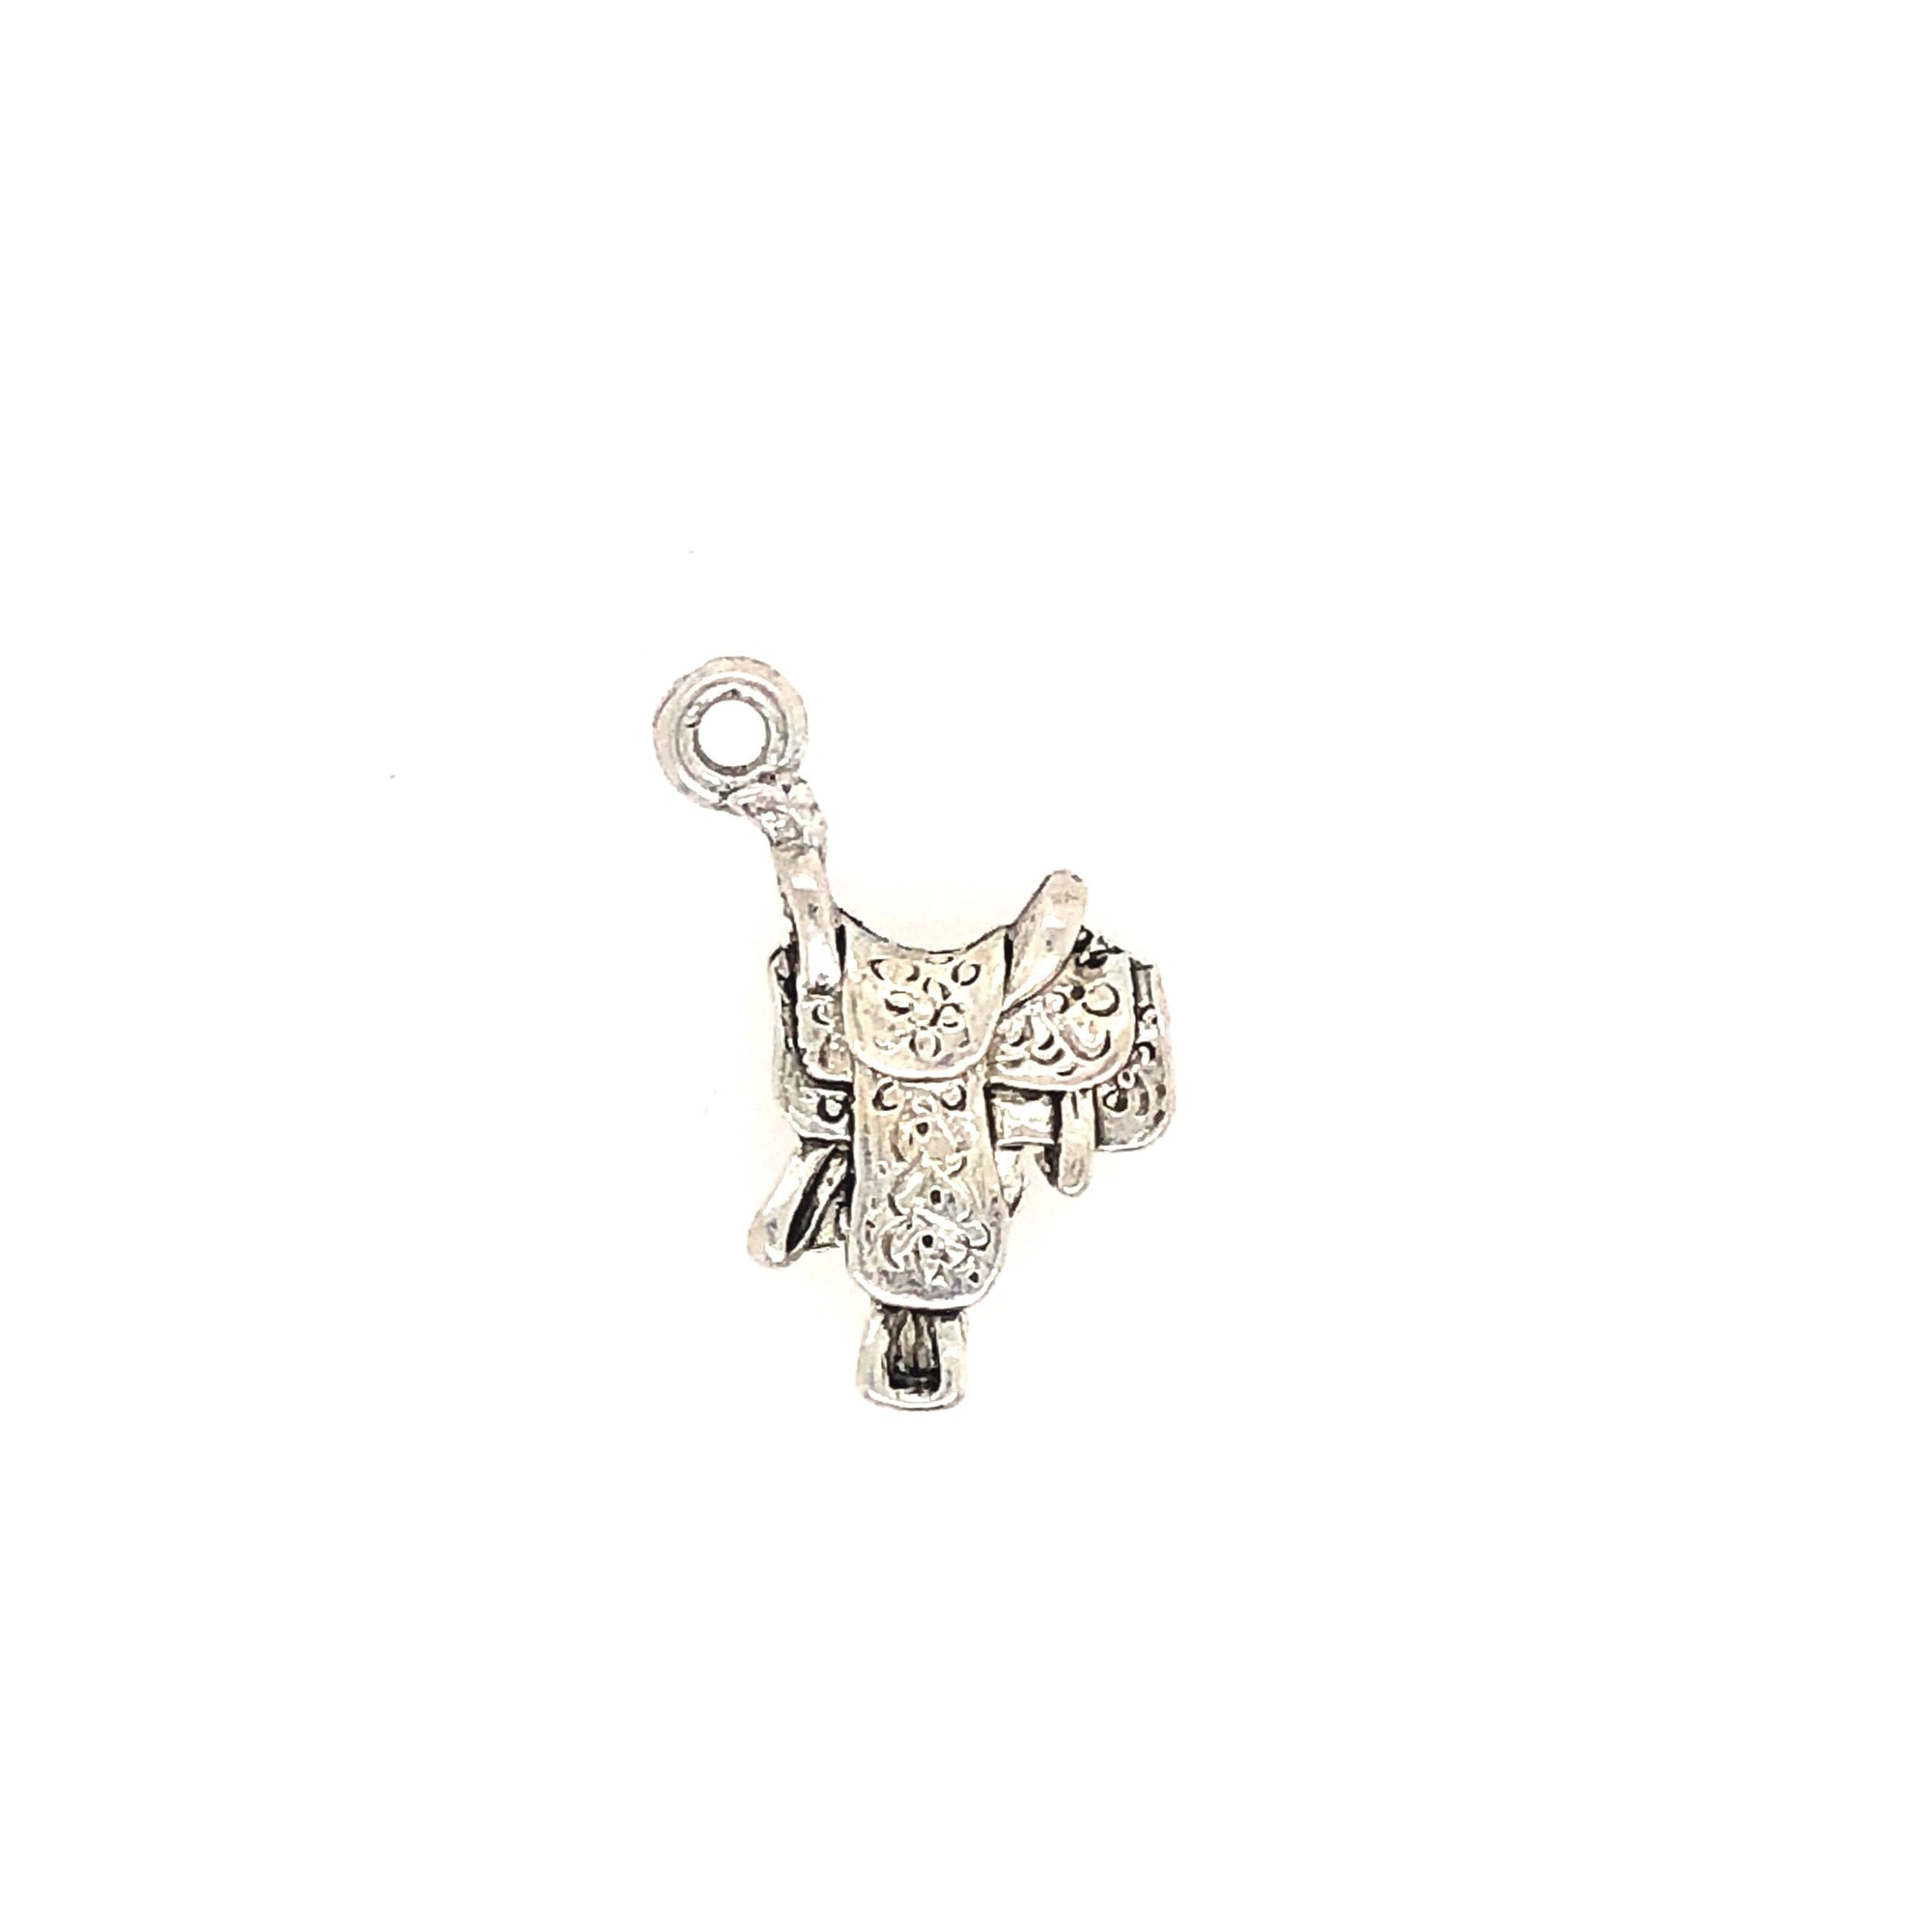 Western Charms. Sterling Silver Charms. 3-Dimensional. Made in USA. -  Watchus